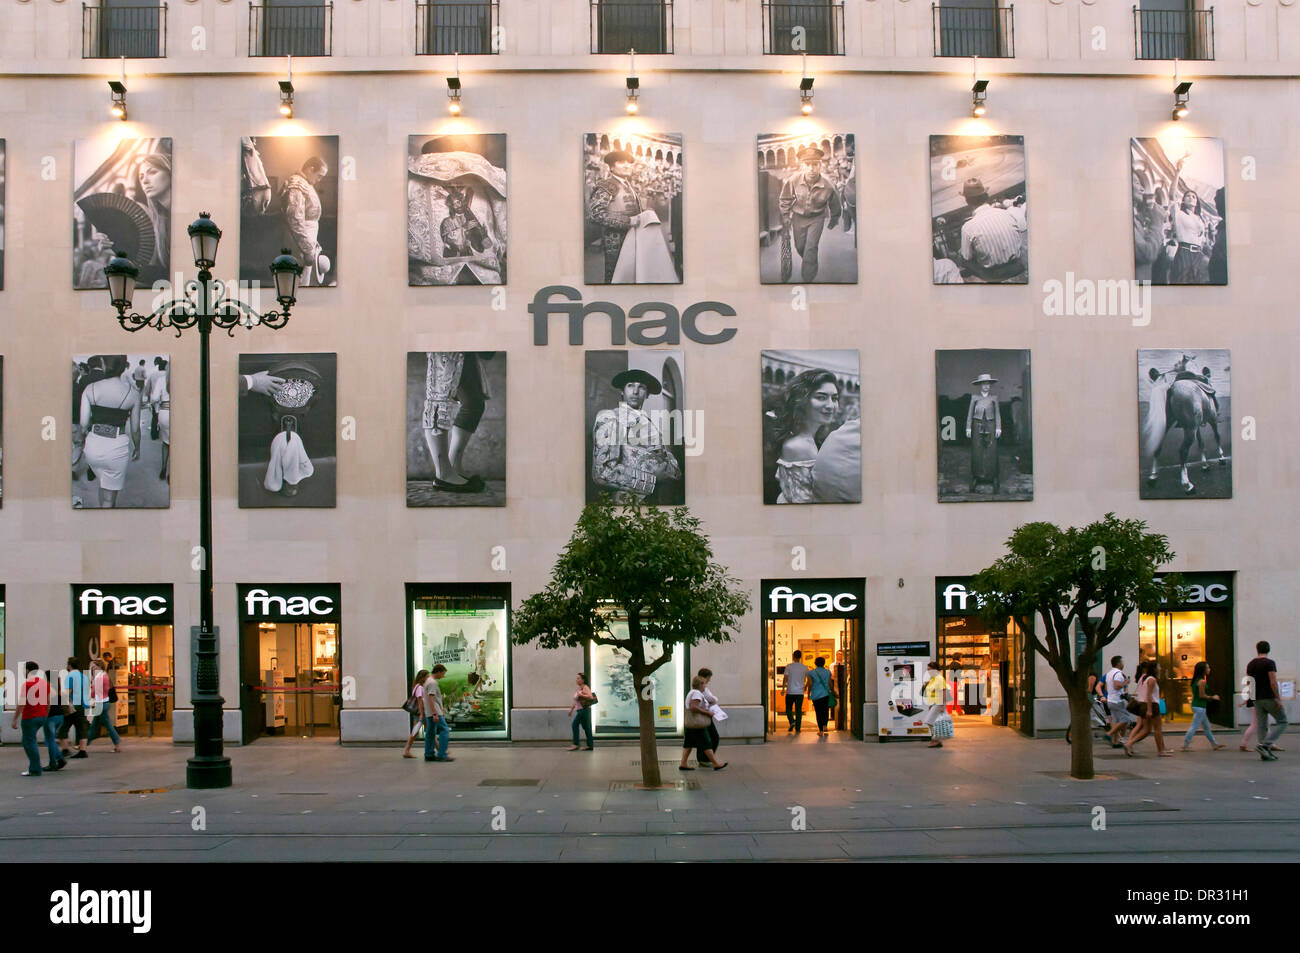 Urban view, FNAC Store, Seville, Region of Andalusia, Spain, Europe Stock Photo